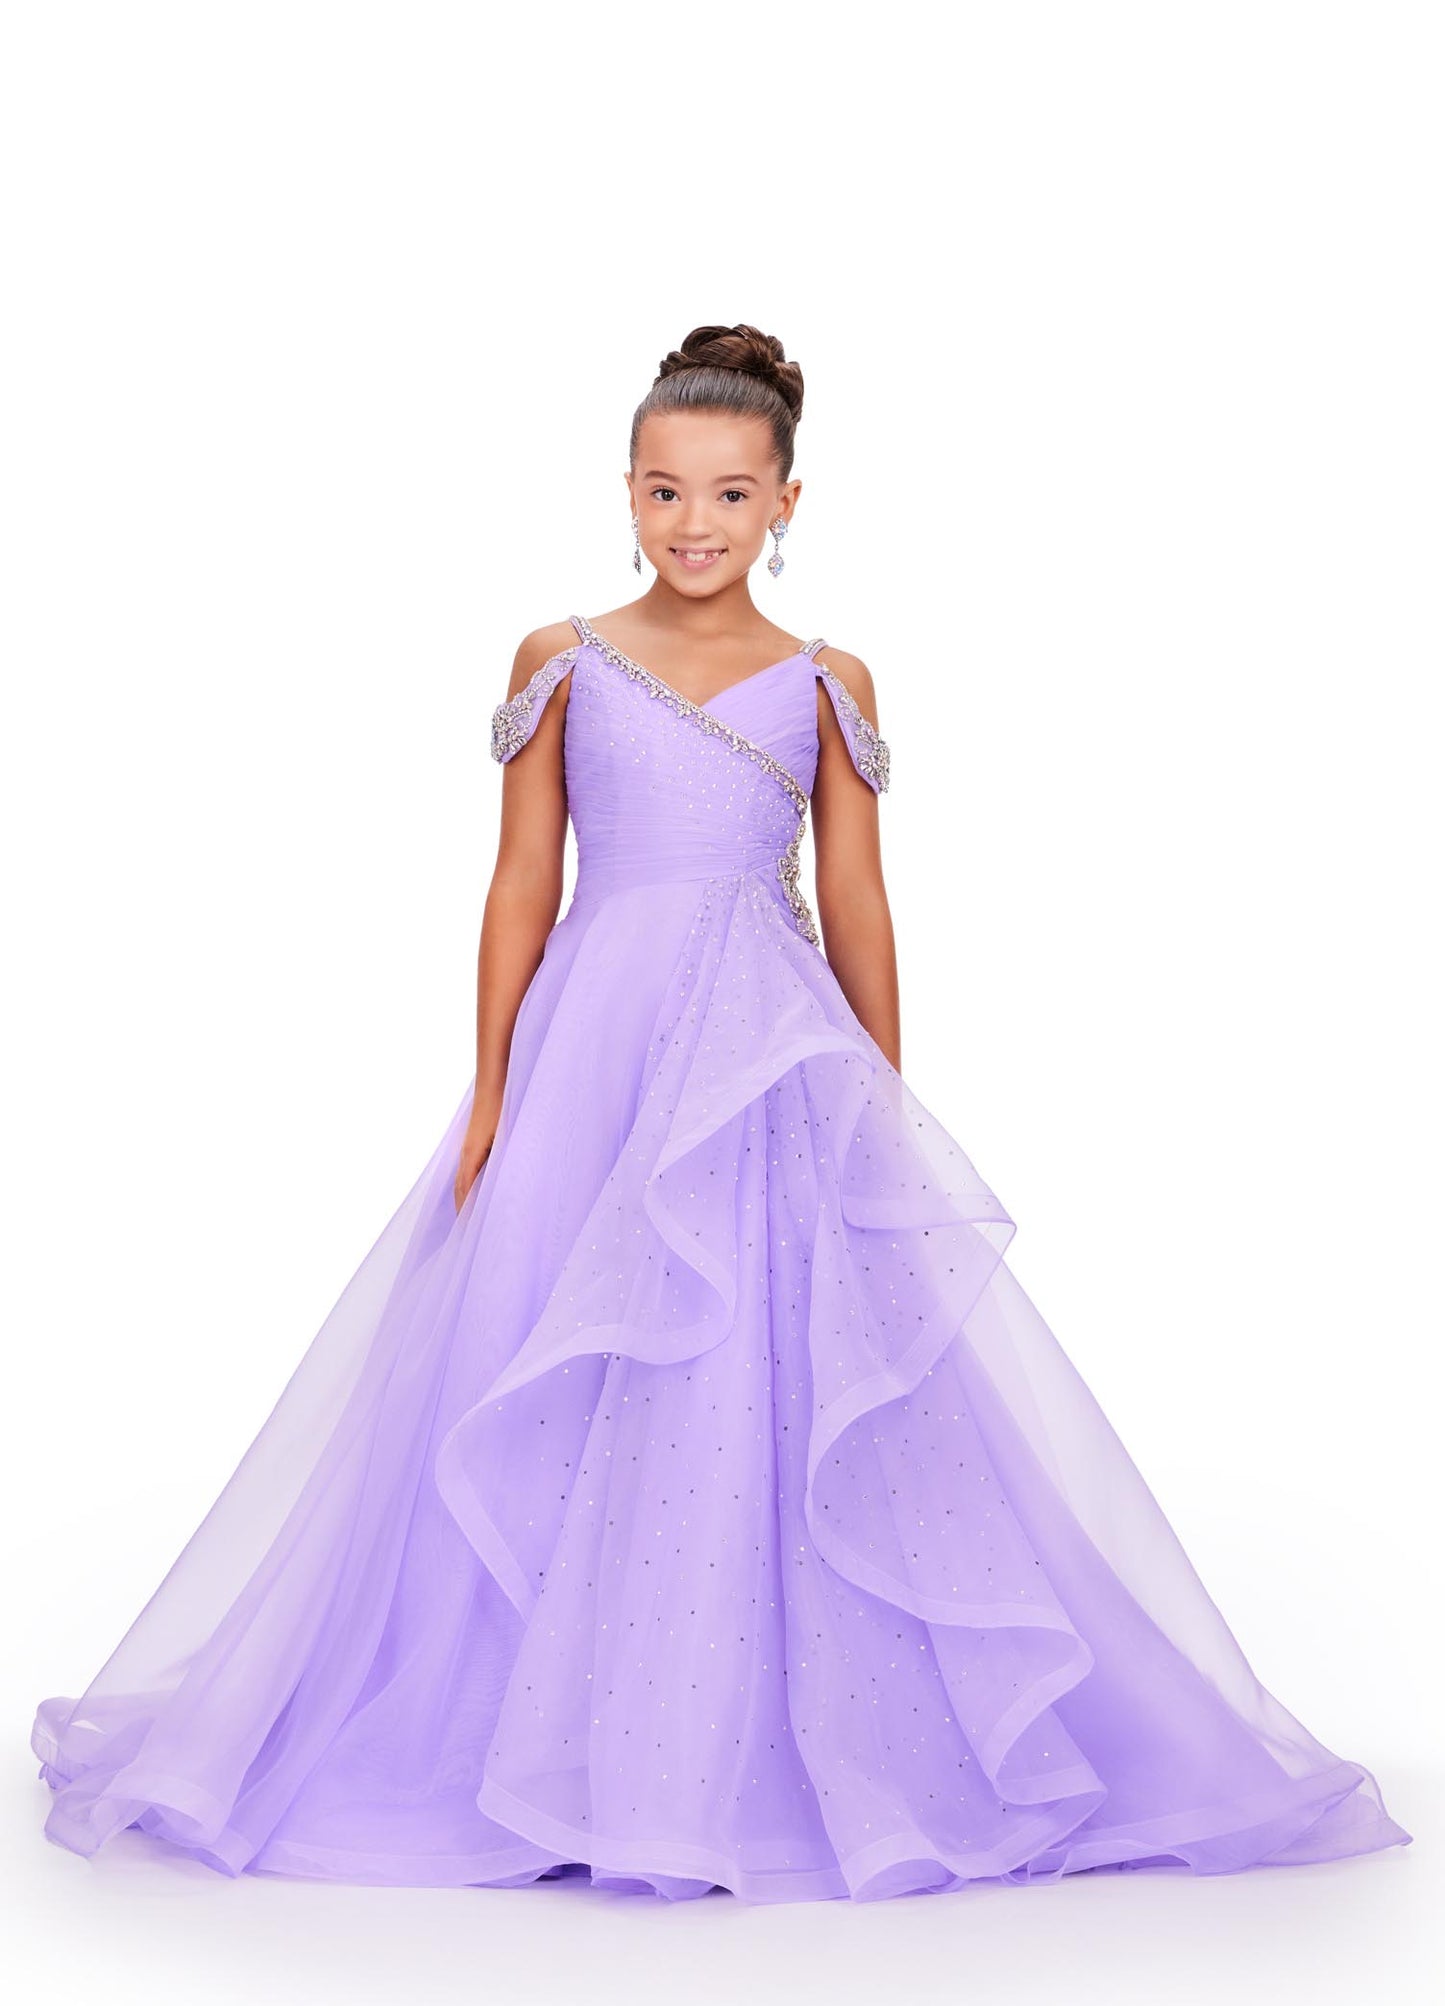 Ashley Lauren Kids 8213 Girls Pageant Dress.  A dress straight out of a fairytale! This organza ball gown features a V-Neckline and off shoulder beaded straps. The beadwork cascades down the dress giving major princess vibes! V-Neckline Off Shoulder Straps Crystal Details Ball Gown Black, Orchid, Sky